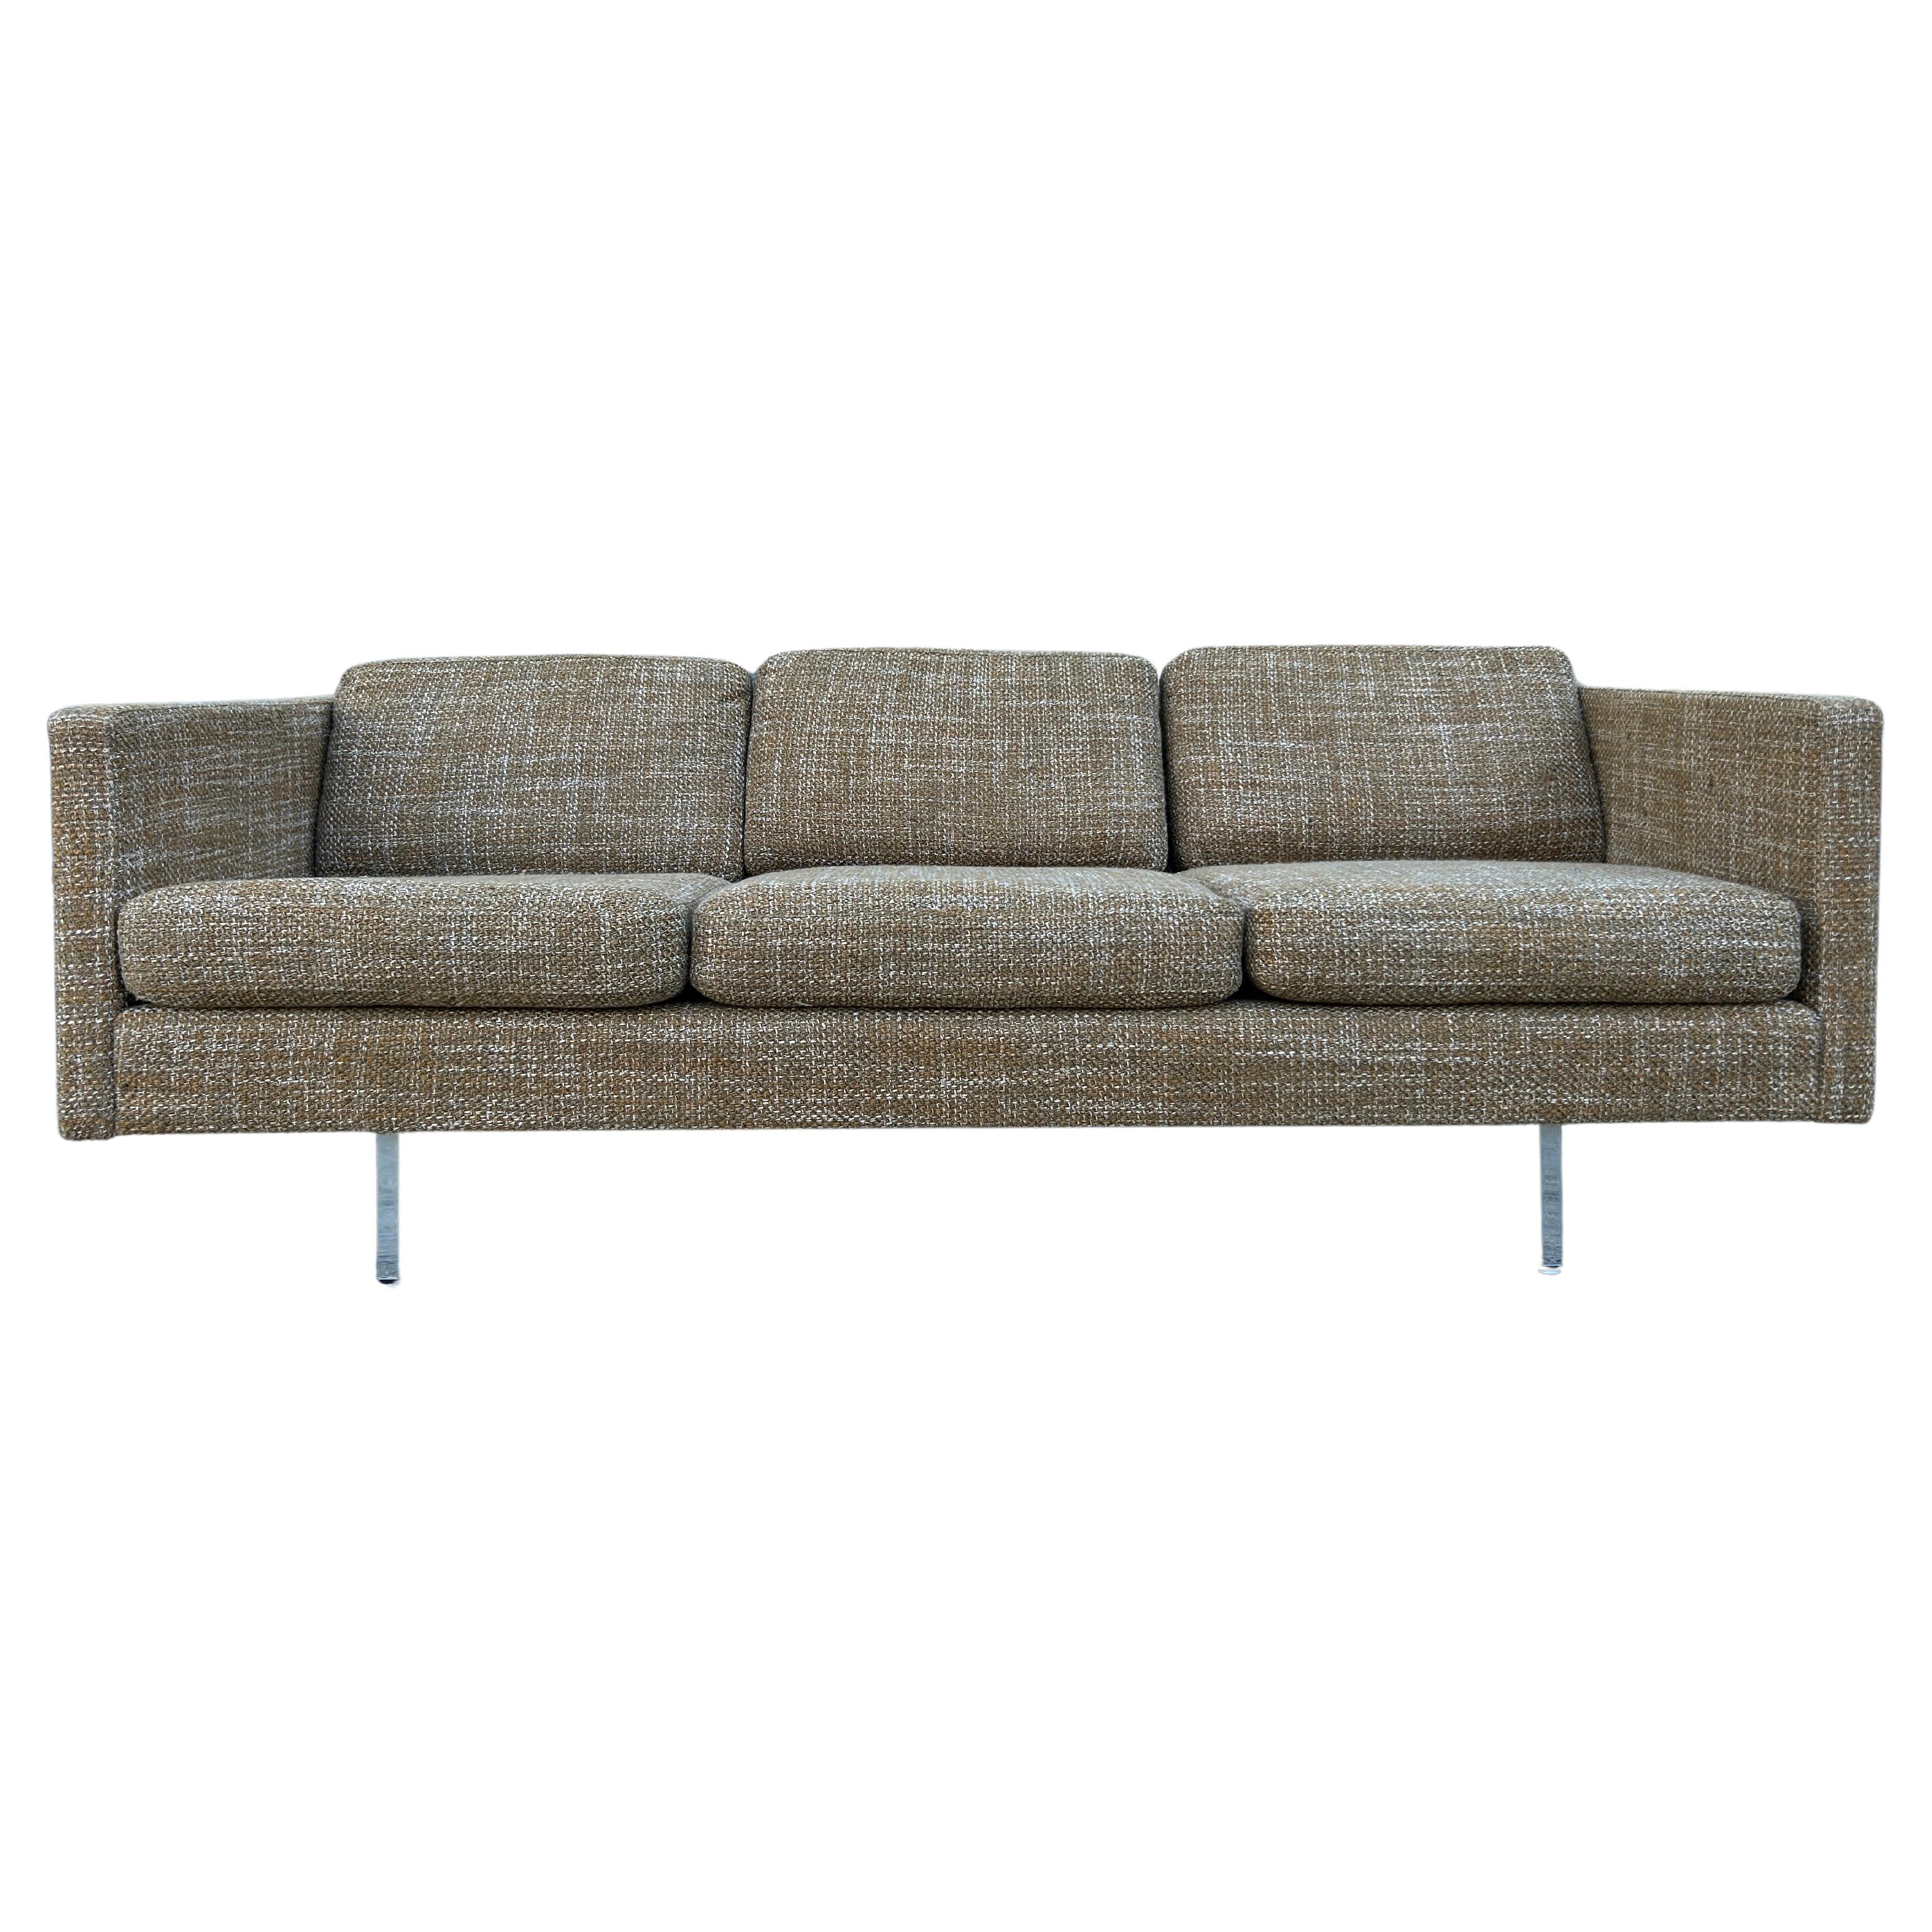 Mid-Century Danish Modern Cube 3 Seat Sofa in Brown Woven Upholstery For Sale